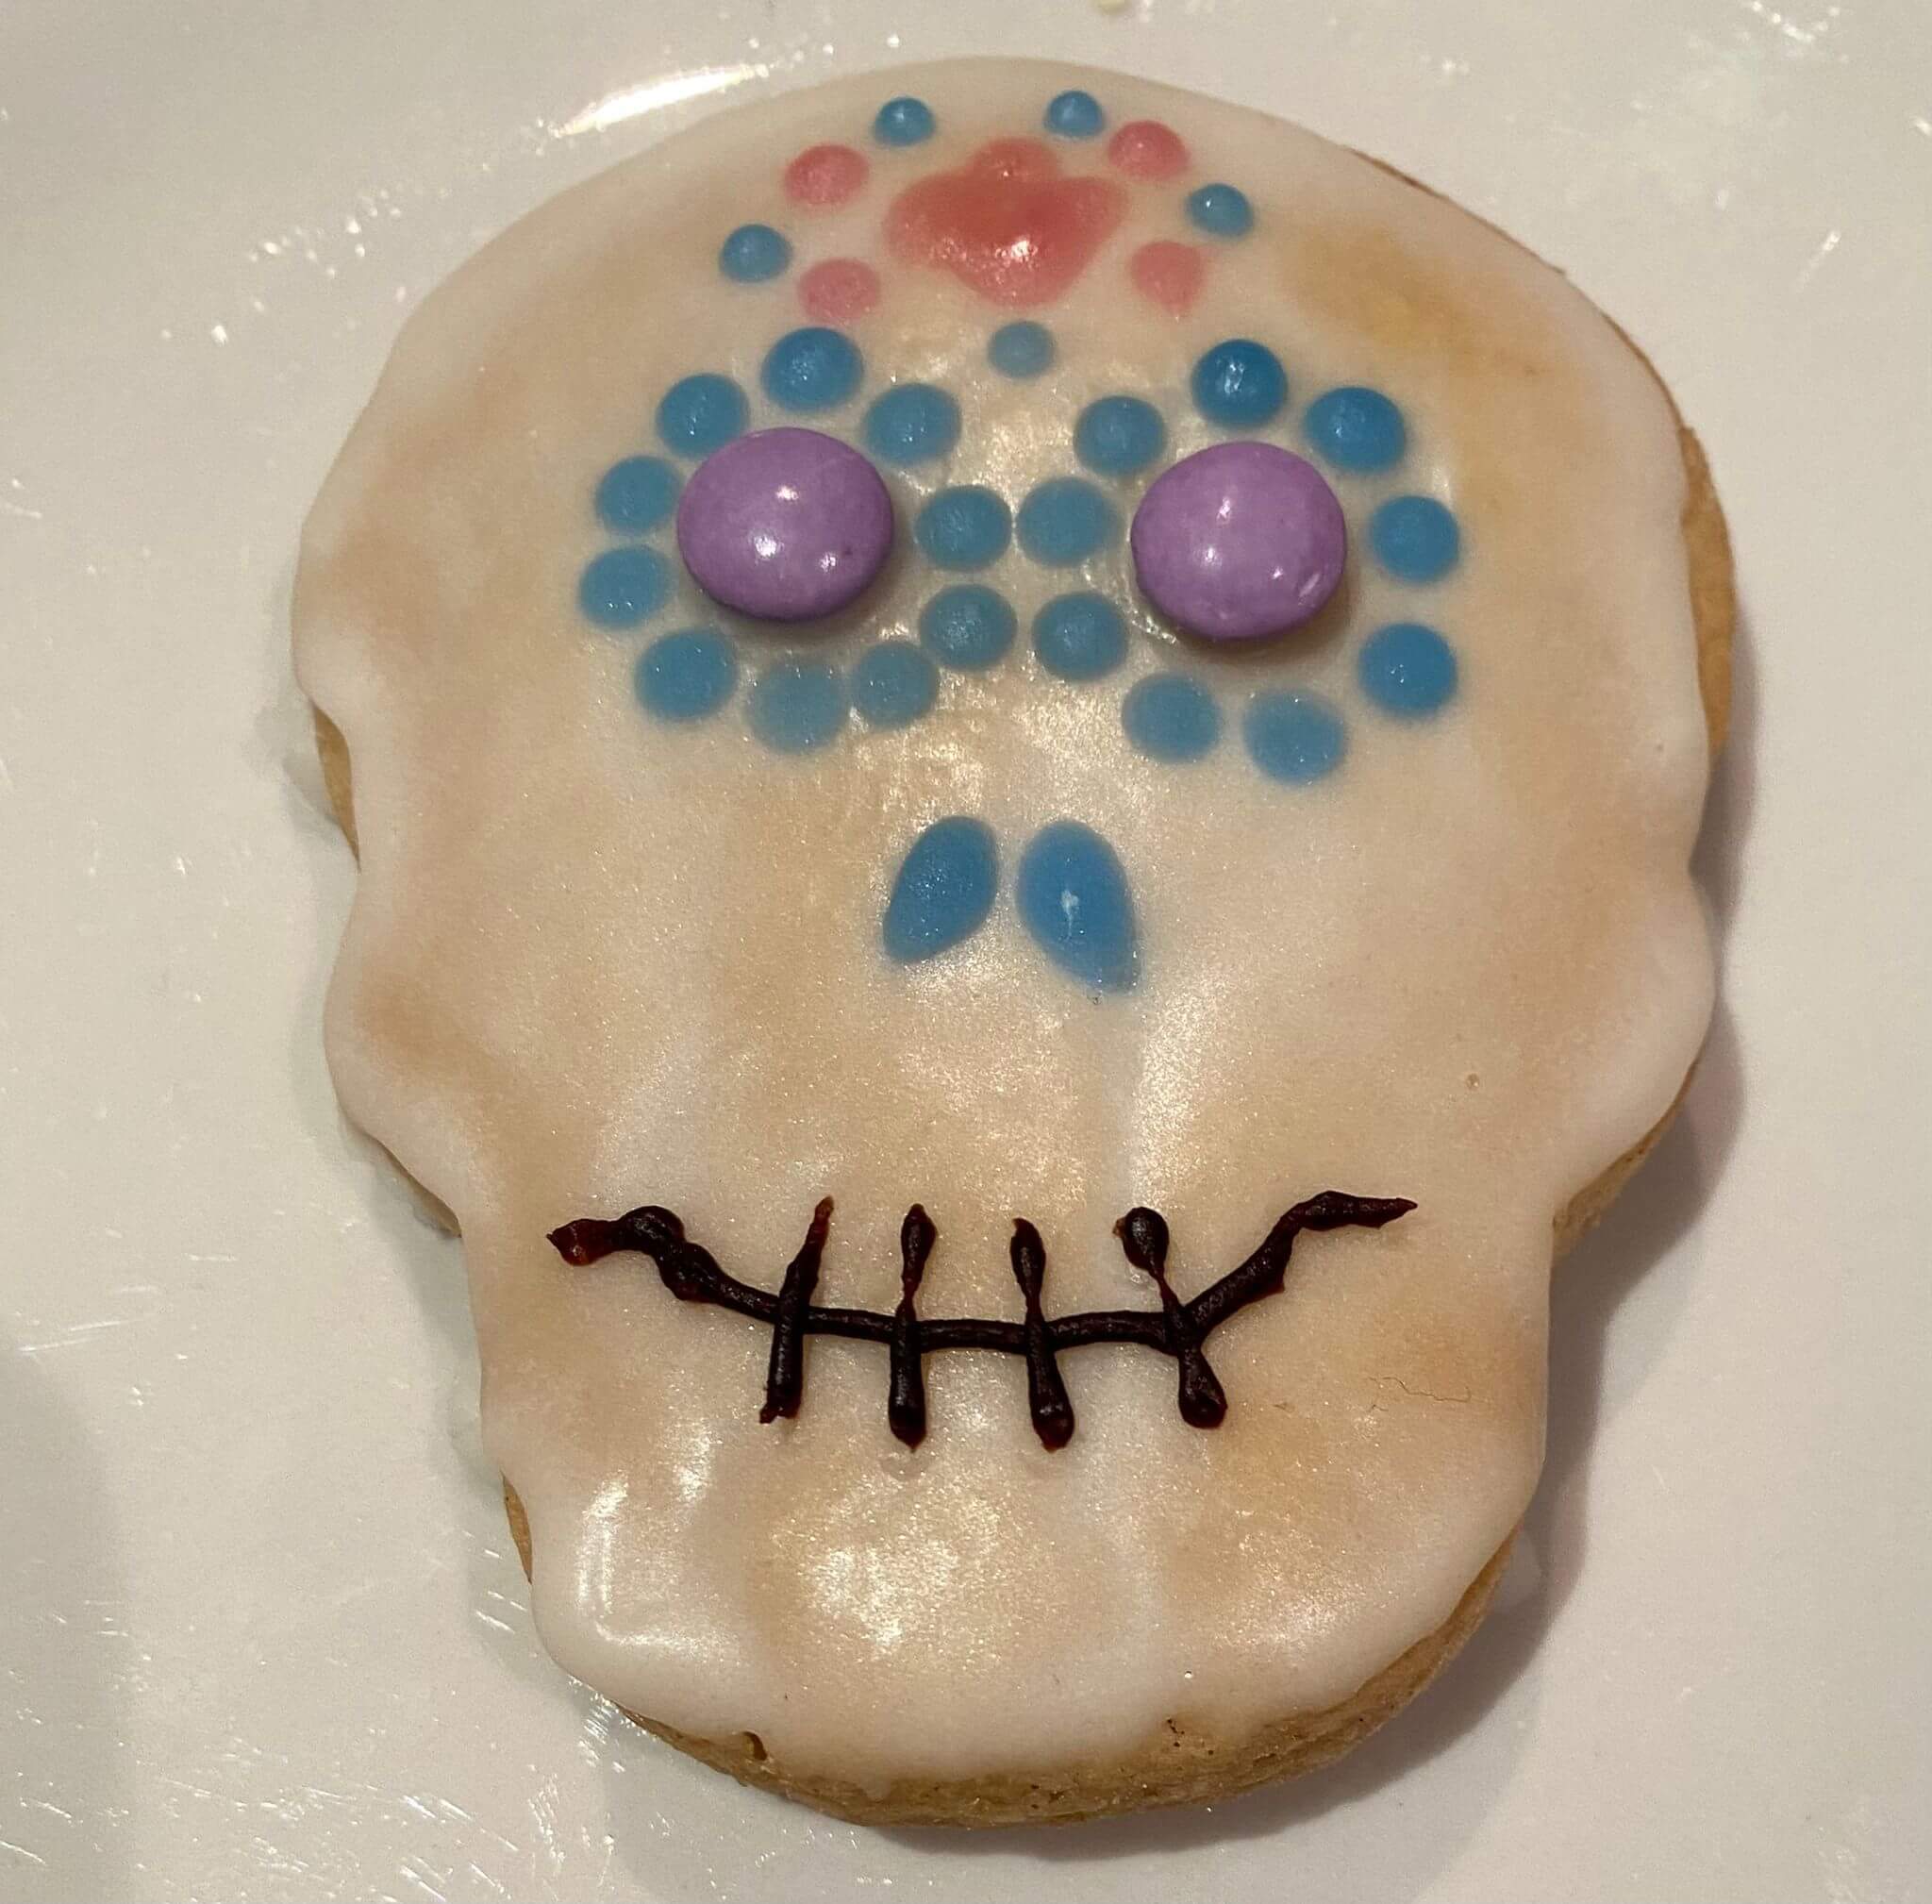 White iced cookie in the shape of a skull. It is decorated with a black mouth, blue nostrils, purple eyes, a red and green flower on it's forehead and blue flowers around it's eyes.